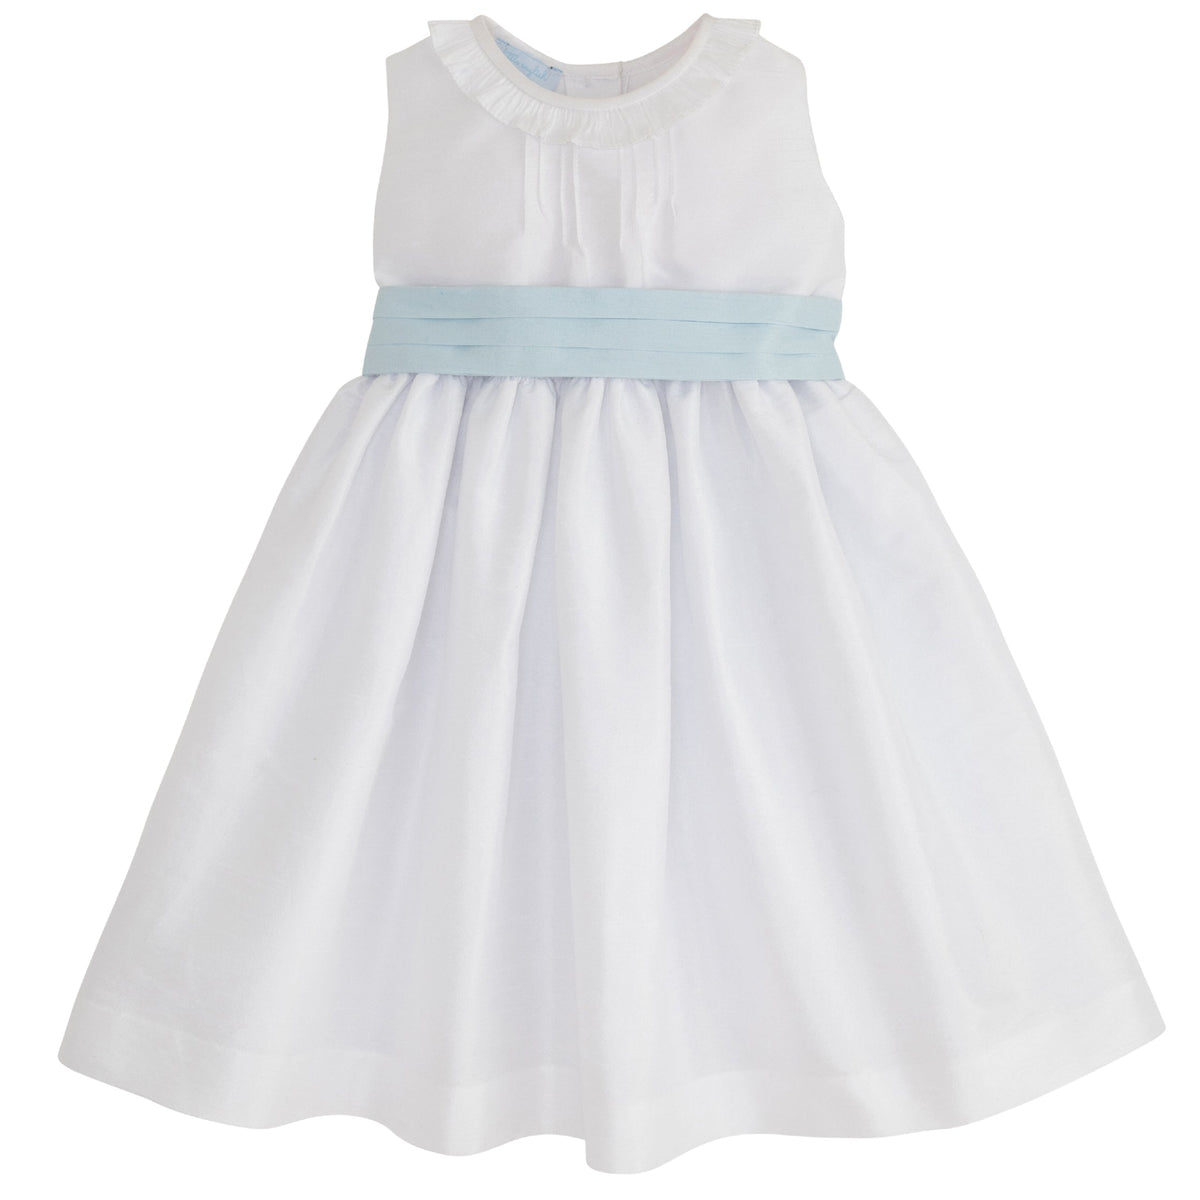 Sleeveless Formal Dress in Special Occasion White